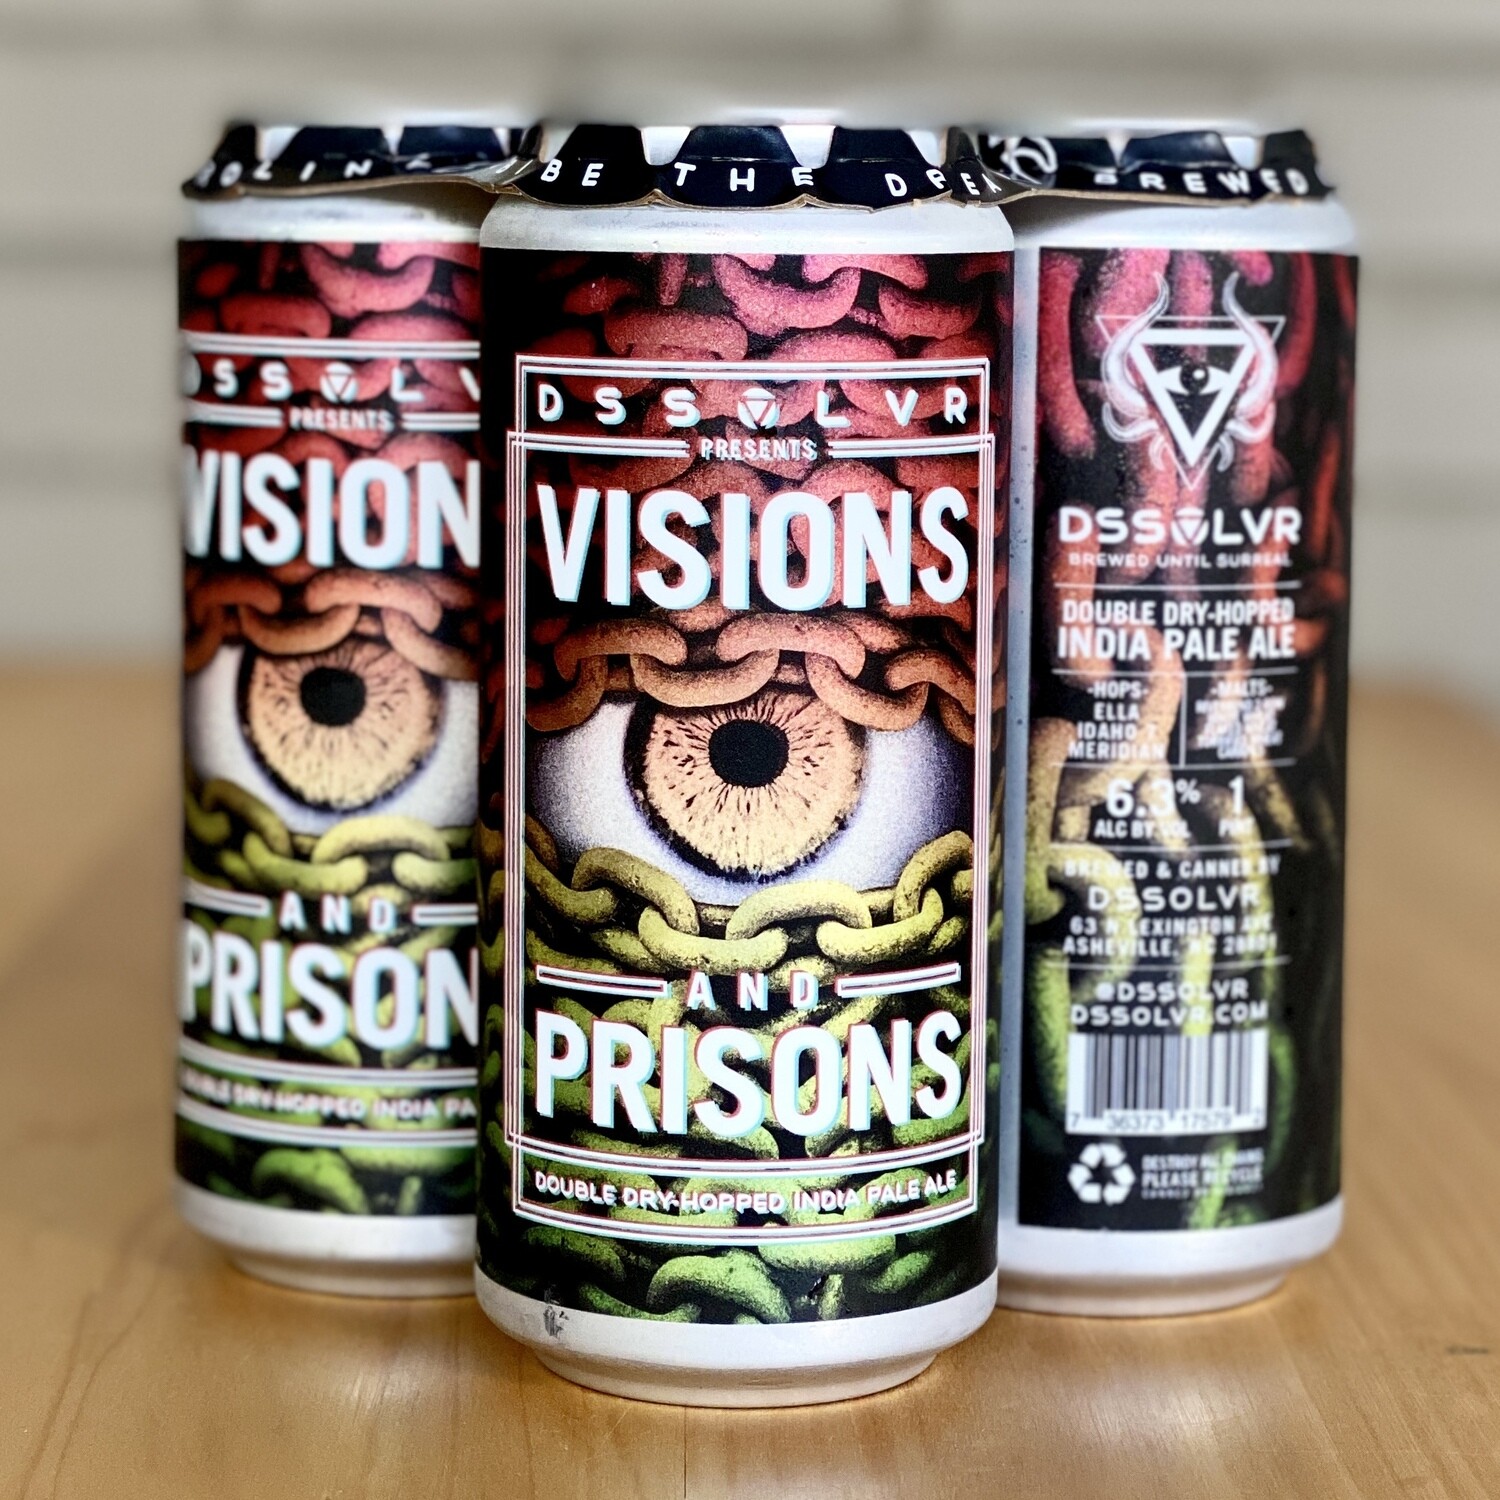 DSSOLVR Visions And Prisons IPA (4pk)